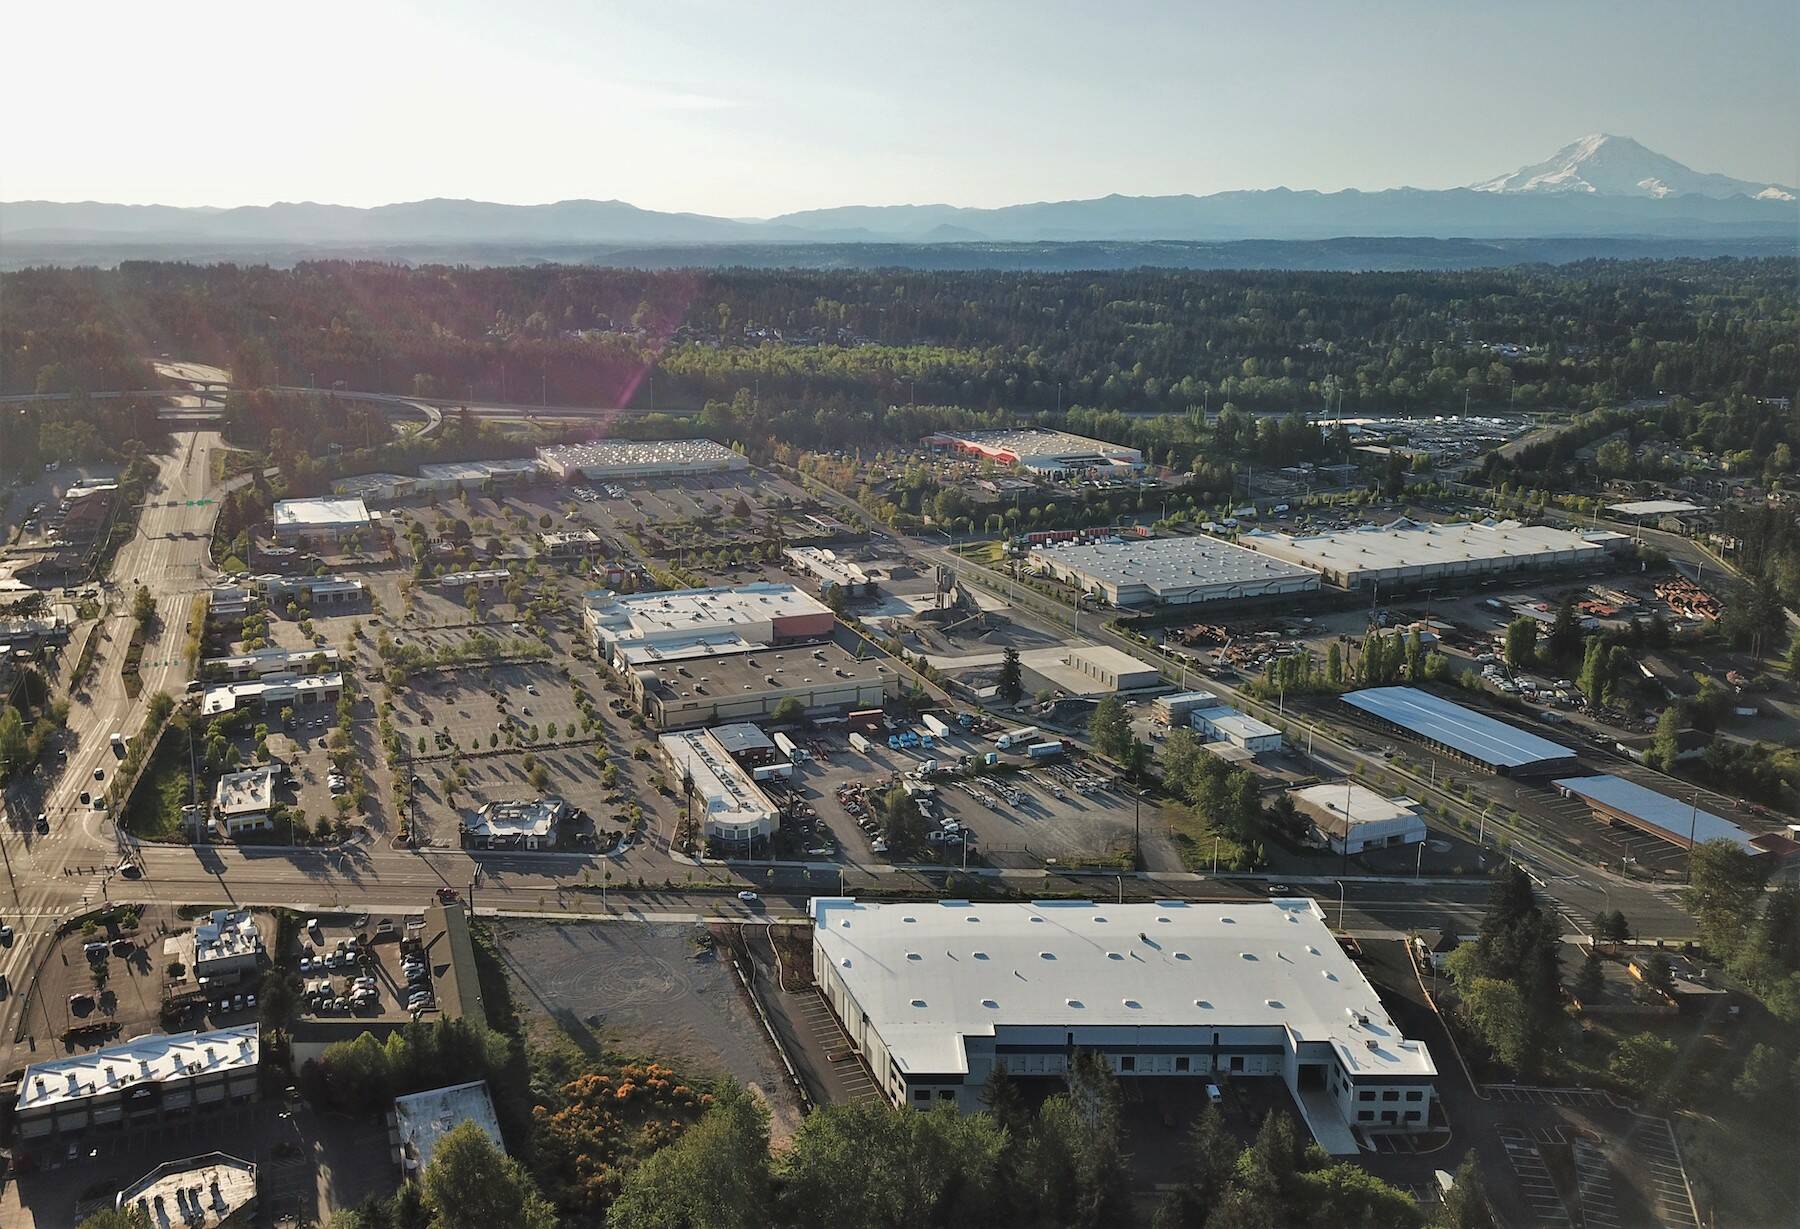 A birds-eye view of South King County overlooks the city of Federal Way and provides a peek at Mount Rainier in the distance. Photo courtesy of Bruce Honda